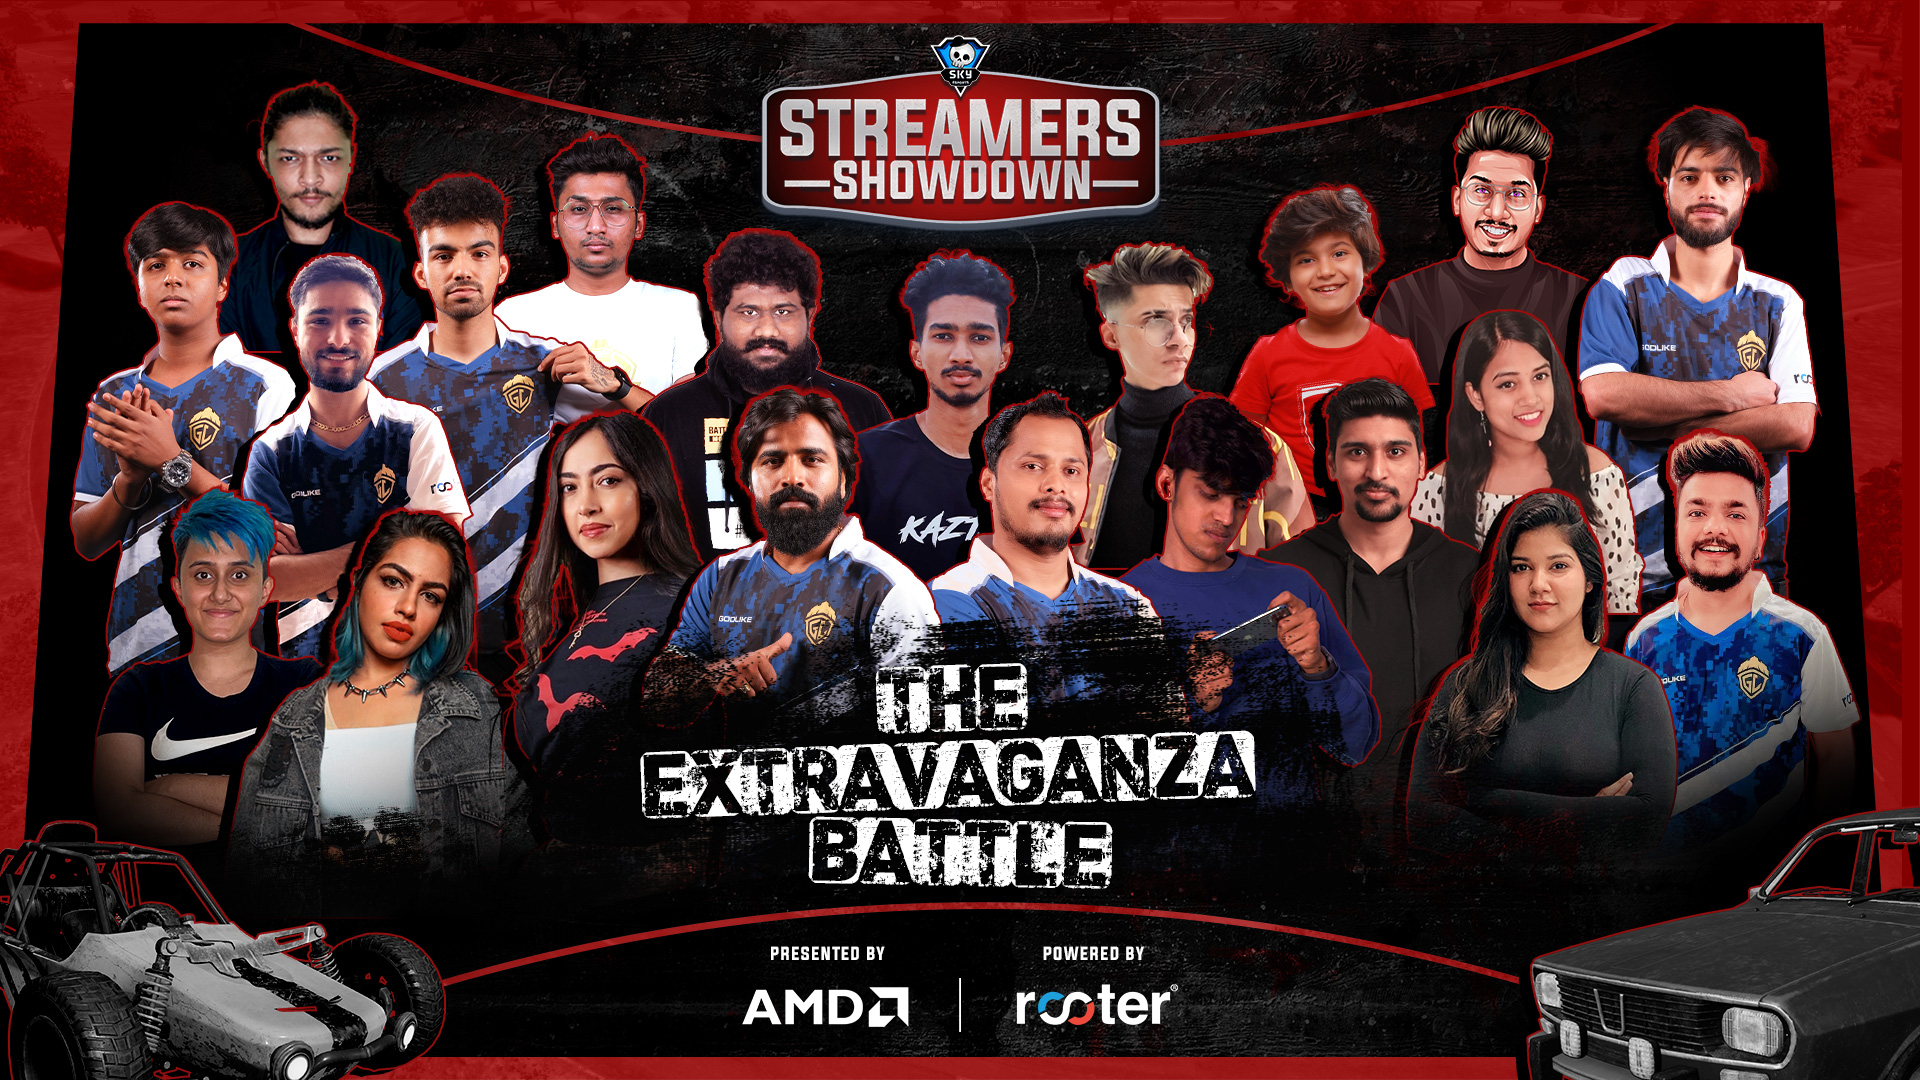 AMD Skyesports Streamers Showdown - BGMI to feature 24 creators competing for the massive prize pool of Rs. 15 lacs